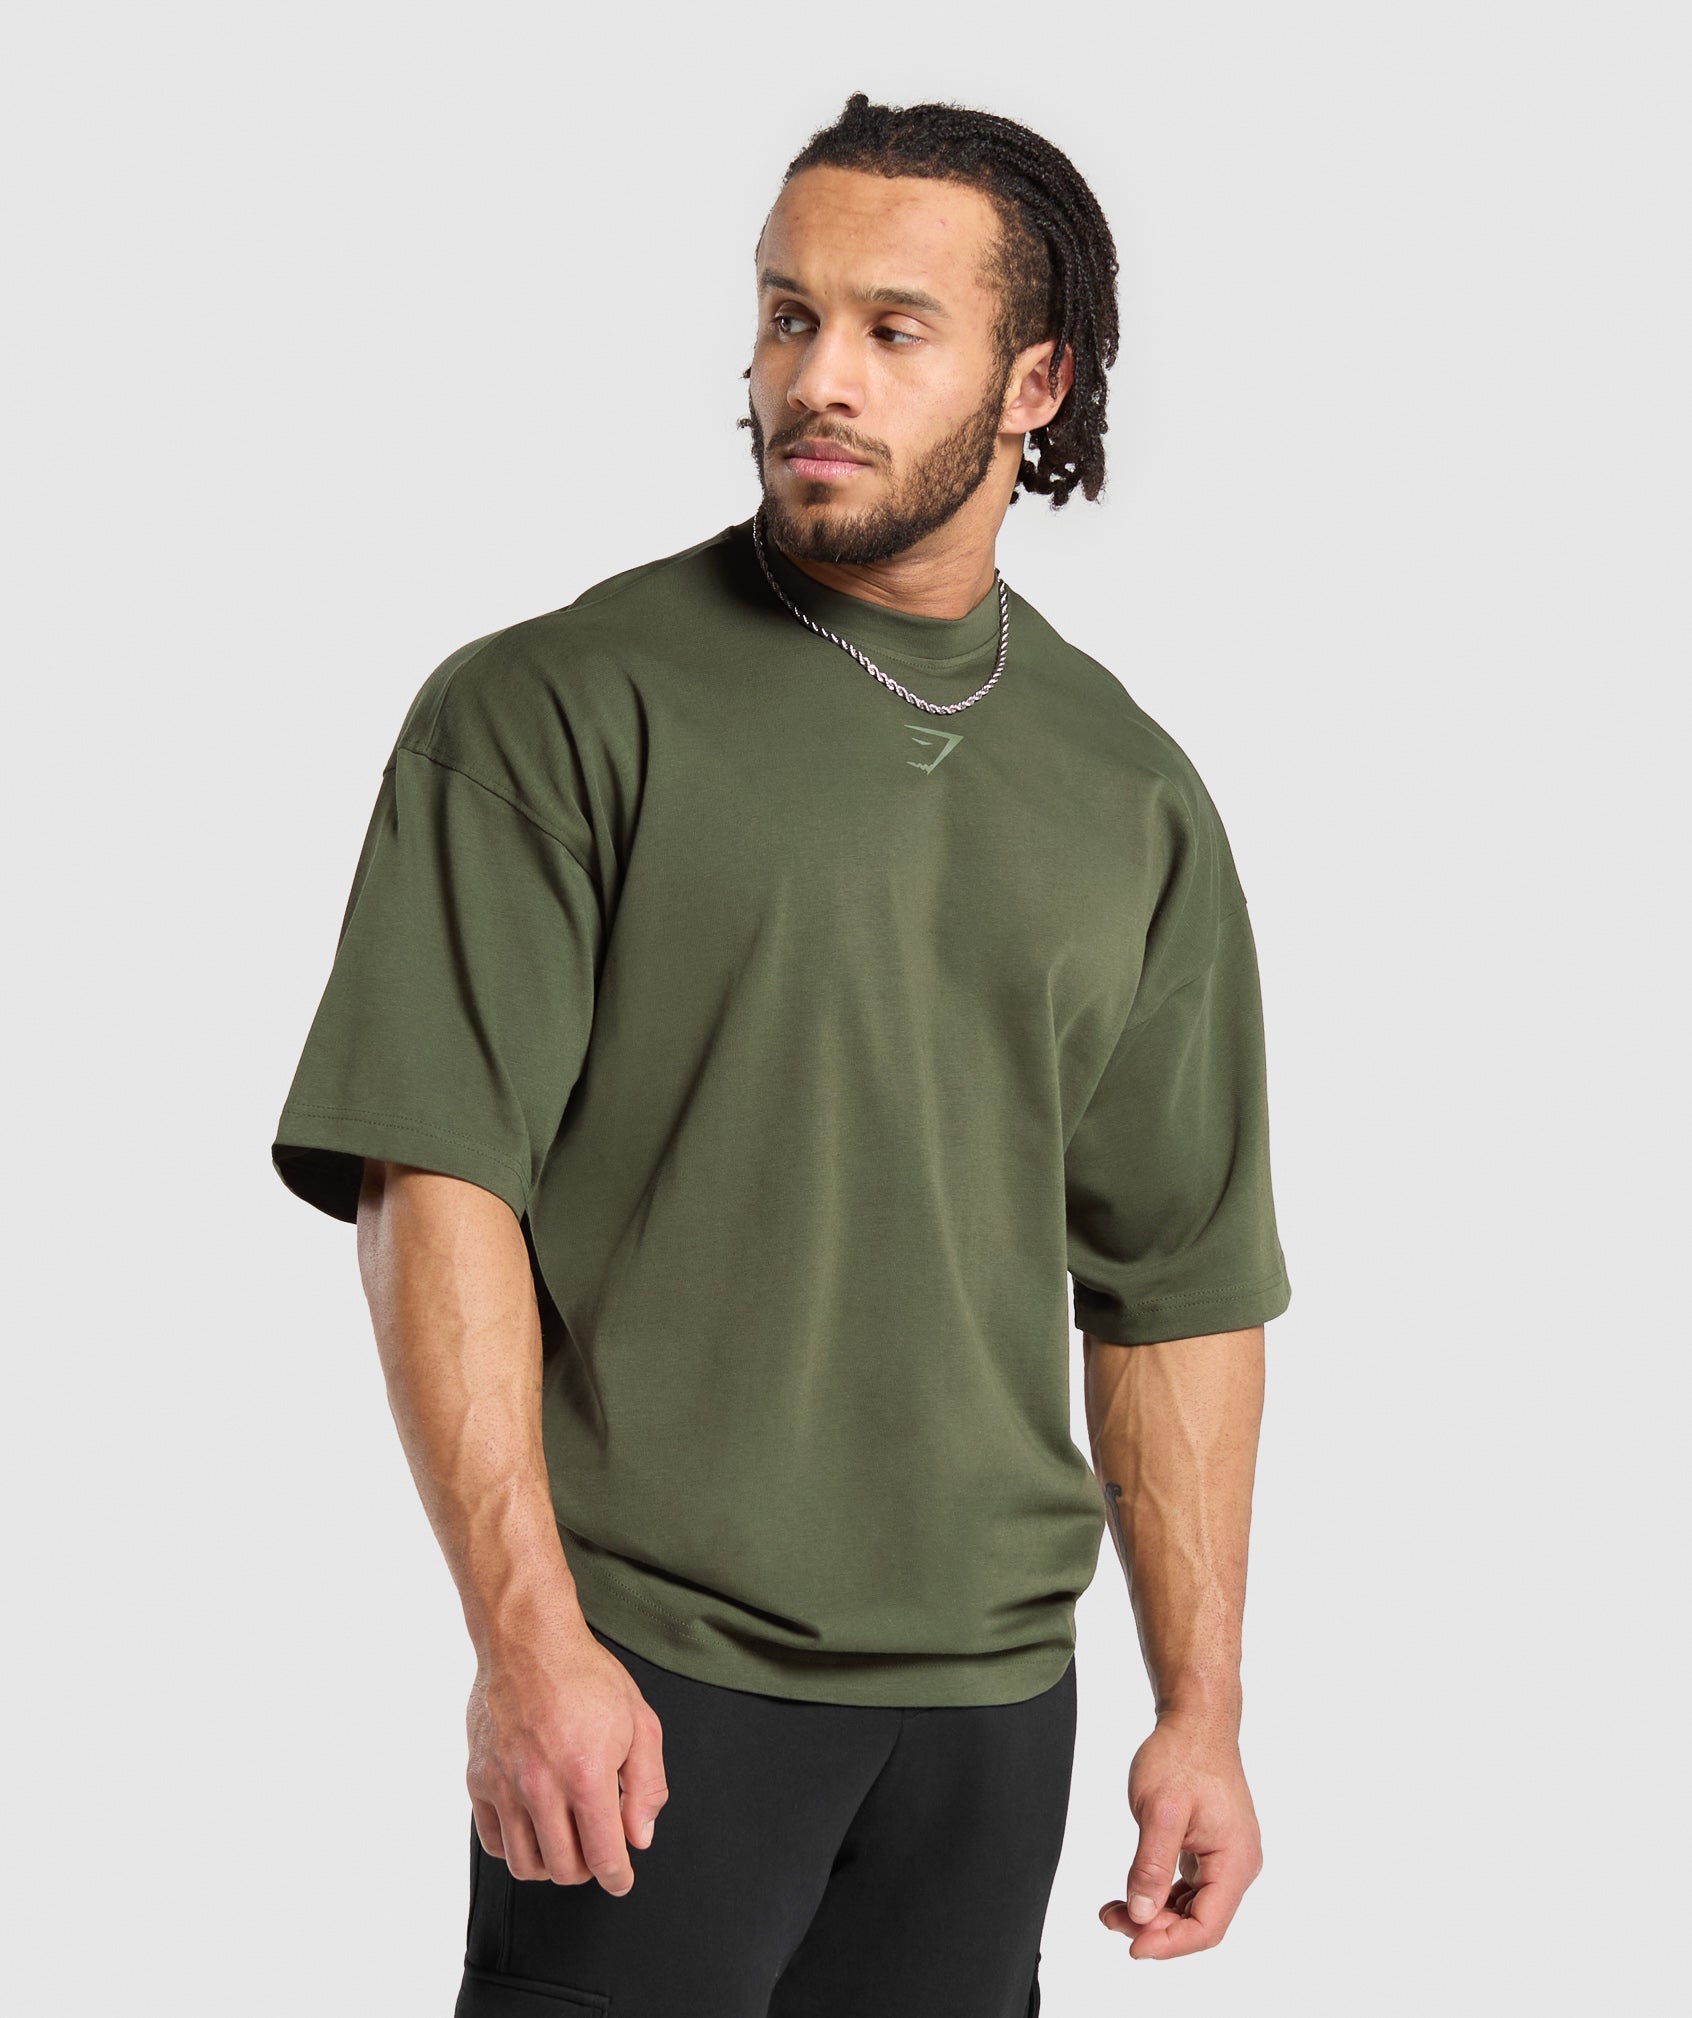 Sets N Reps T-Shirt in Winter Olive - view 3